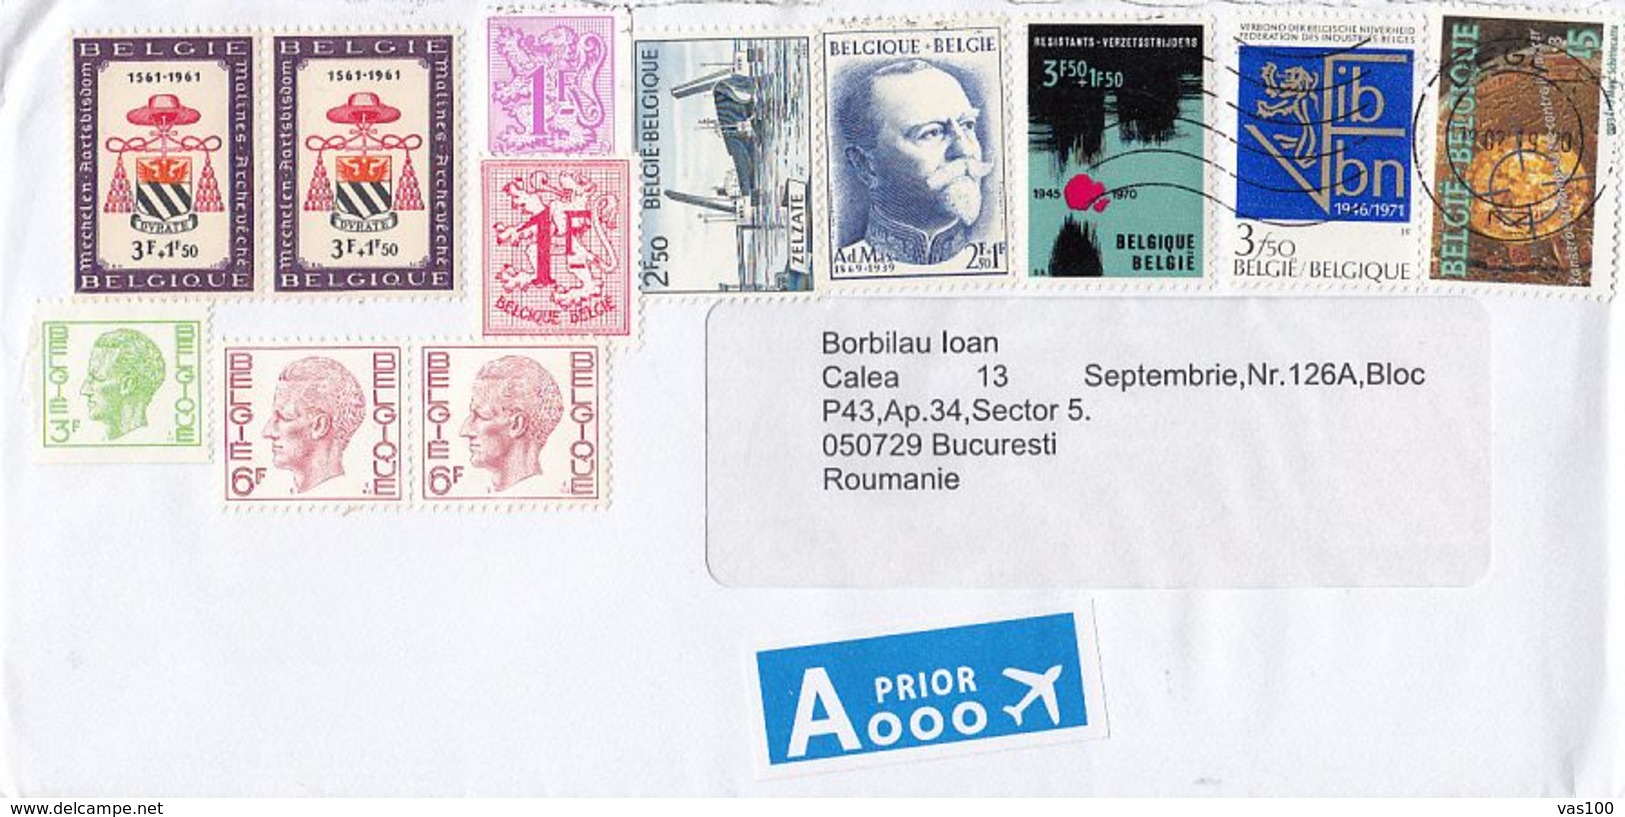 COAT OF ARMS, SHIP, PERSONALITIES, STAMPS ON COVER, 2019, BELGIUM - Covers & Documents